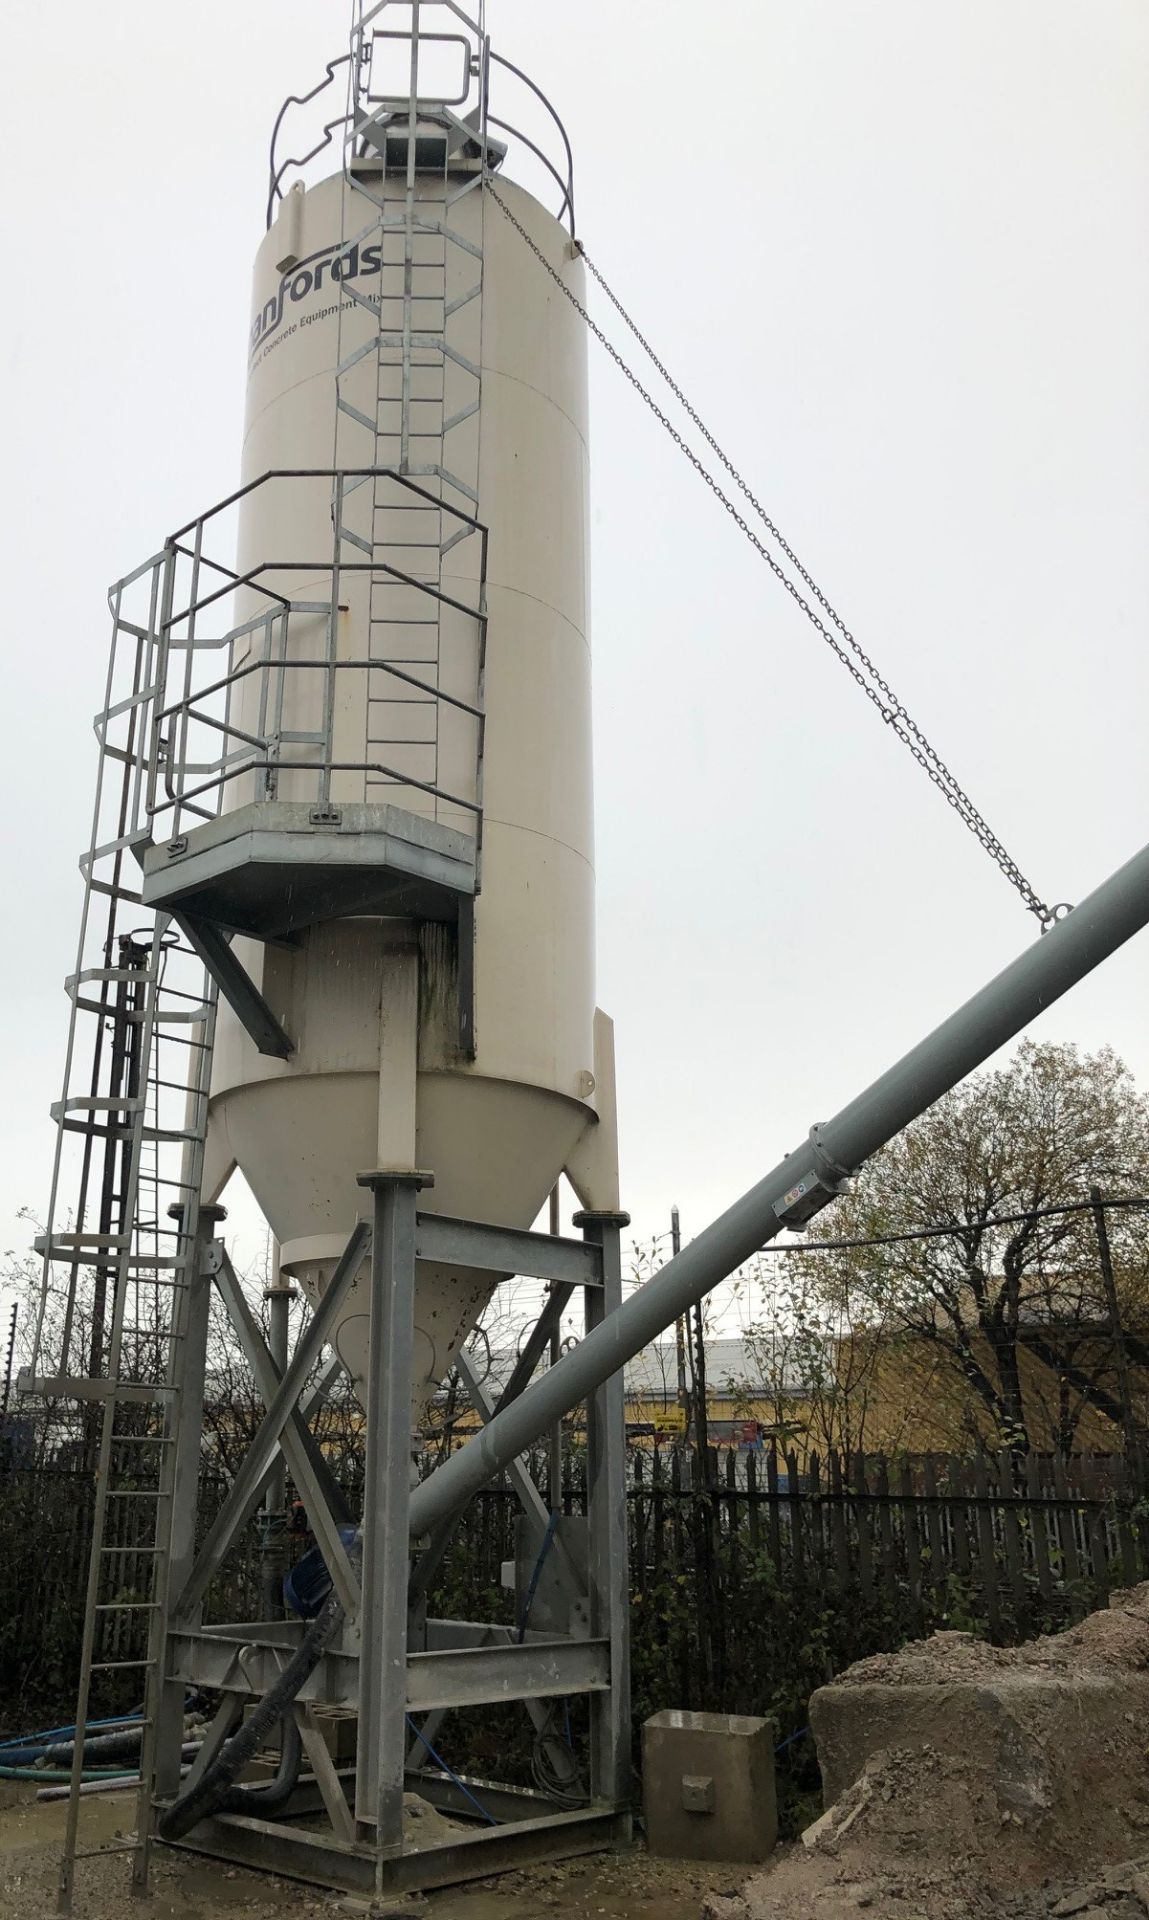 Danford 40 Tonnes Storage Silo, Serial Number EF135  (Located Rochdale - See General Notes for More